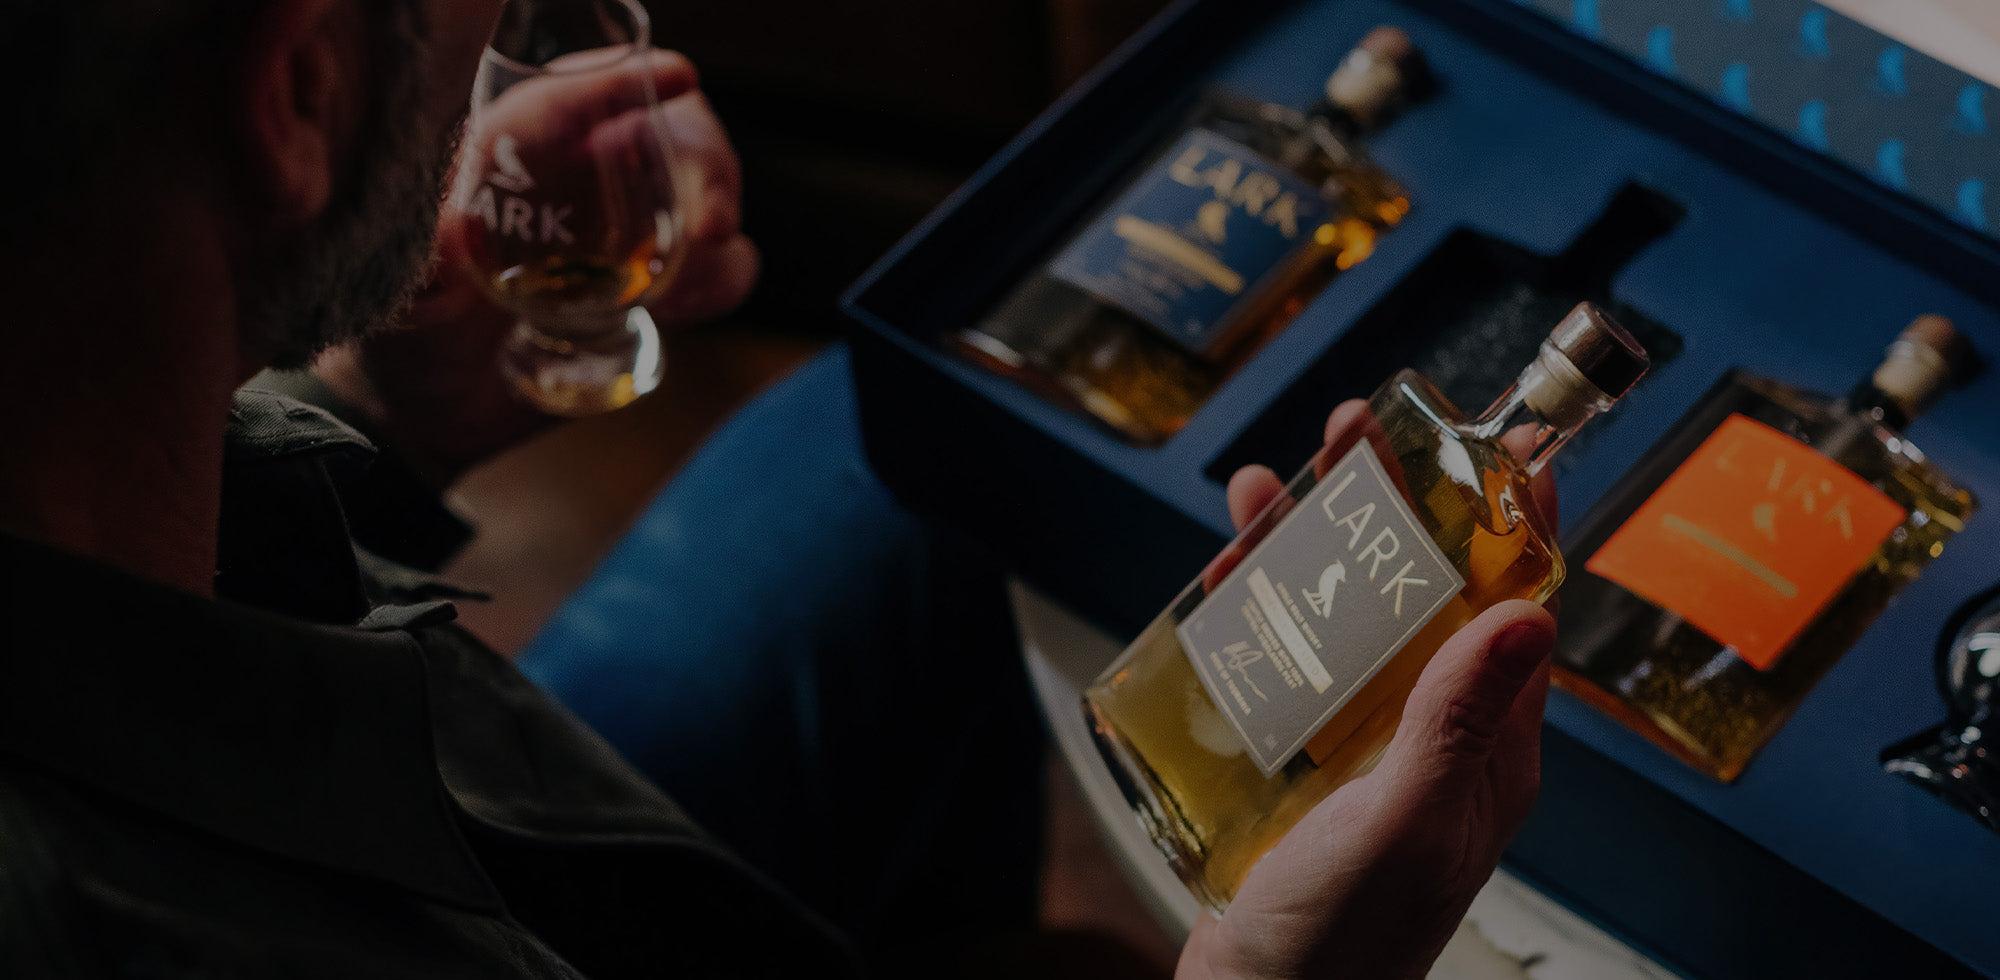 WHISKY GIFTS AND GLASSWARE